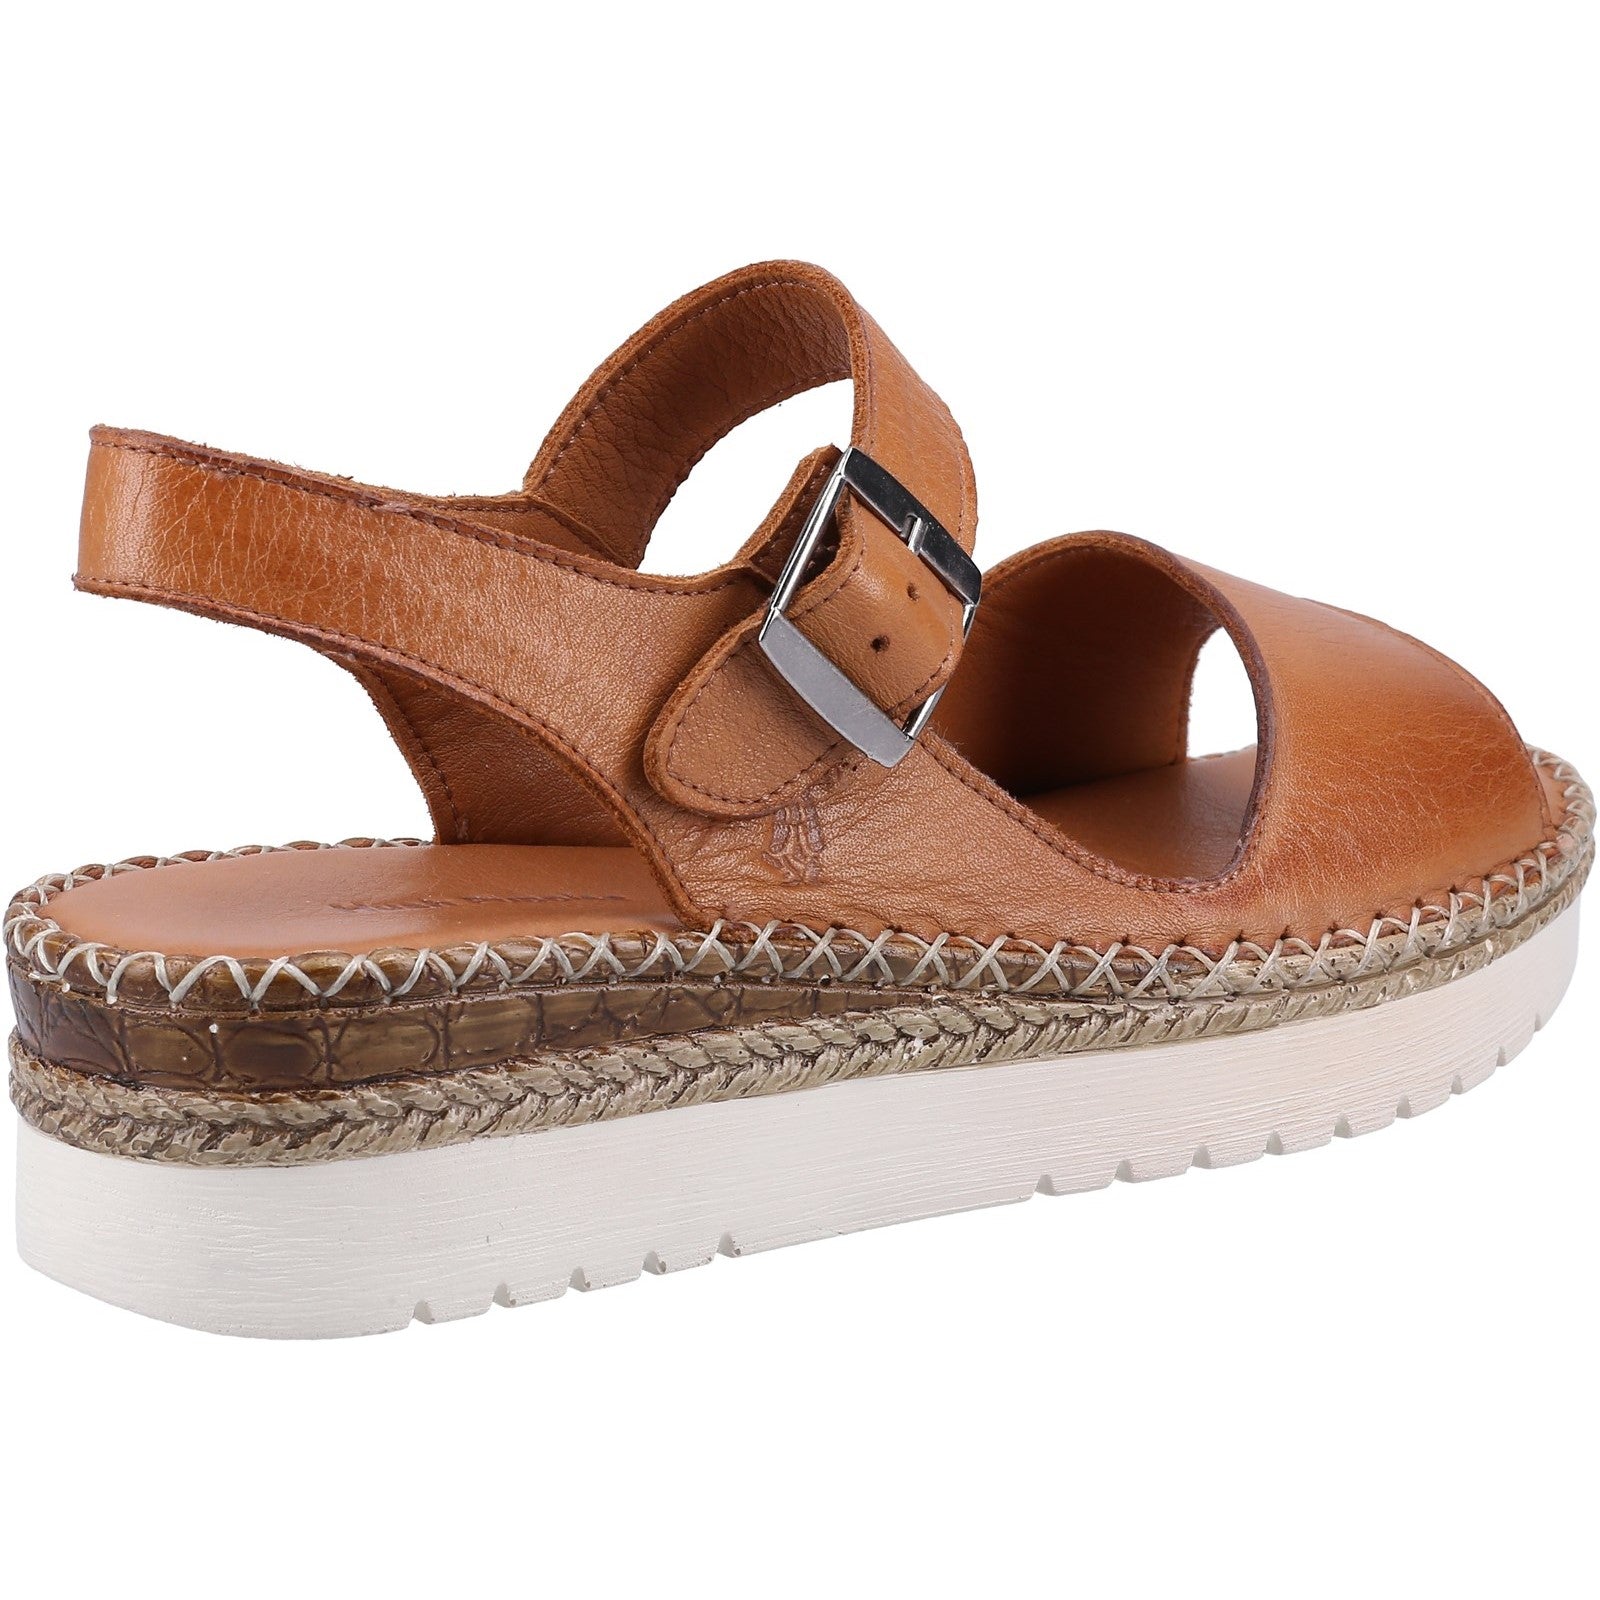 Hush Puppies Womens Stacey Leather Sandal - Tan